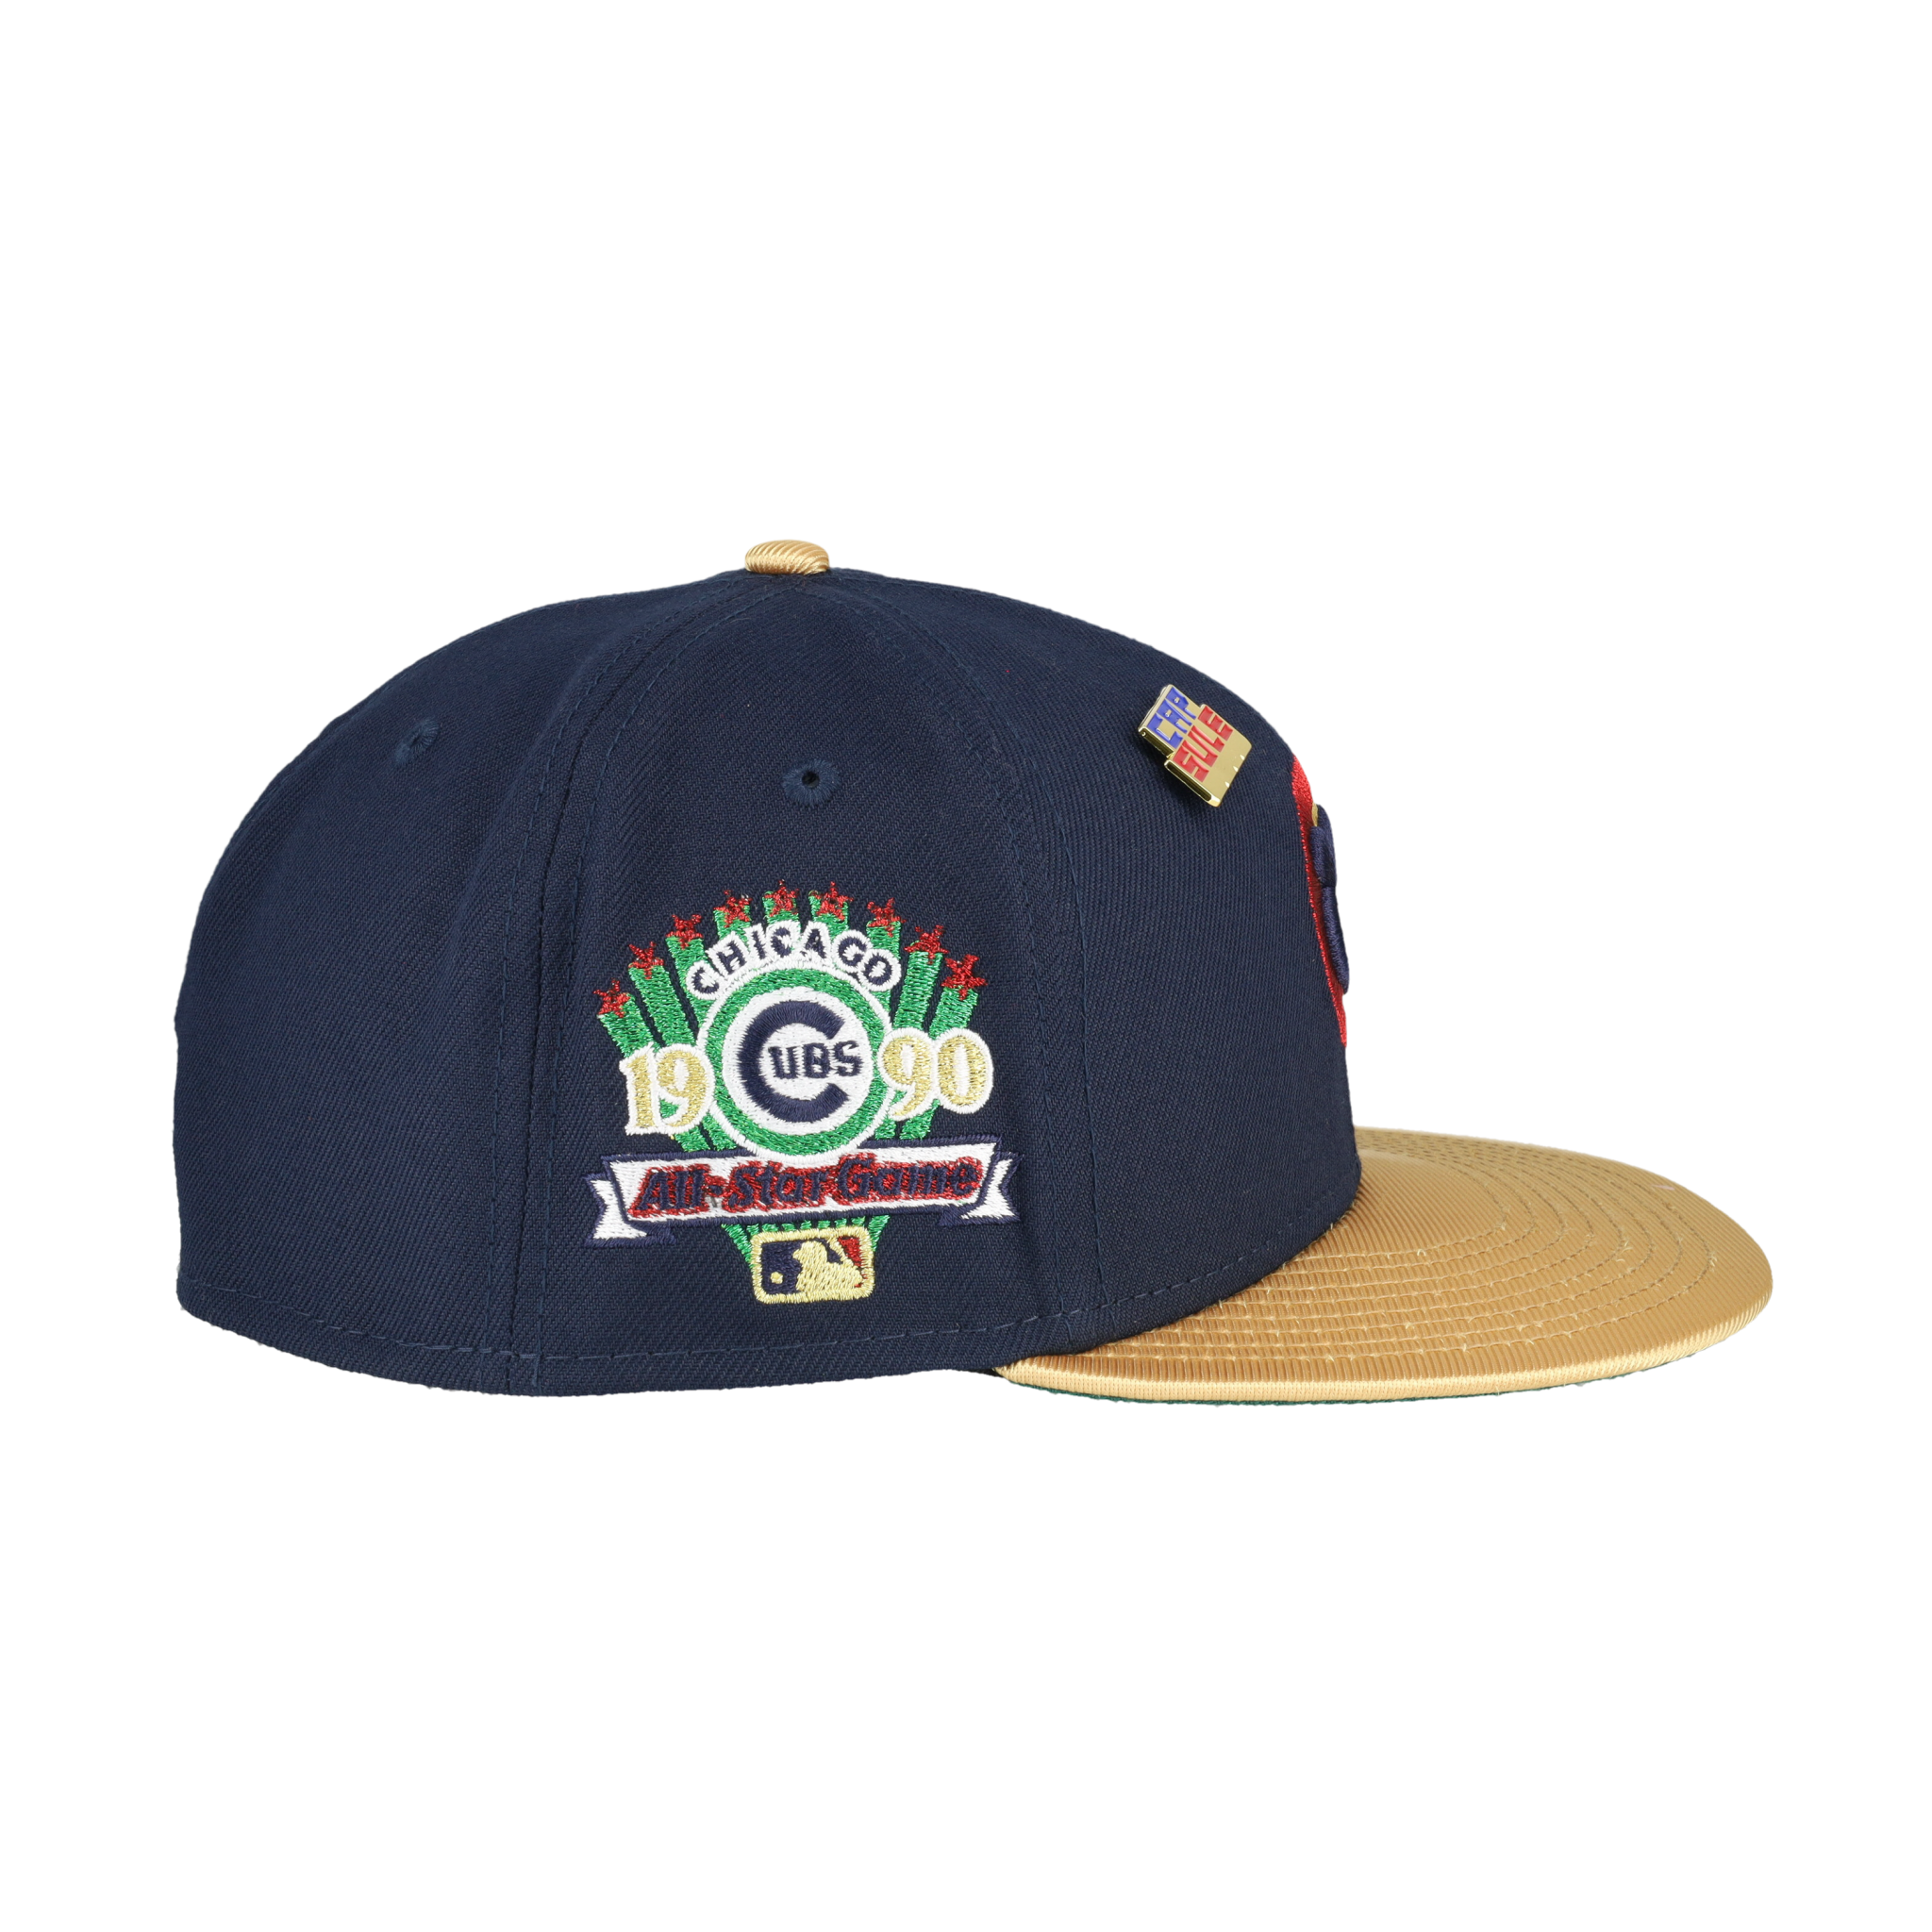 CLEVELAND INDIANS 1950 LOGO NEW ERA 59FIFTY FITTED